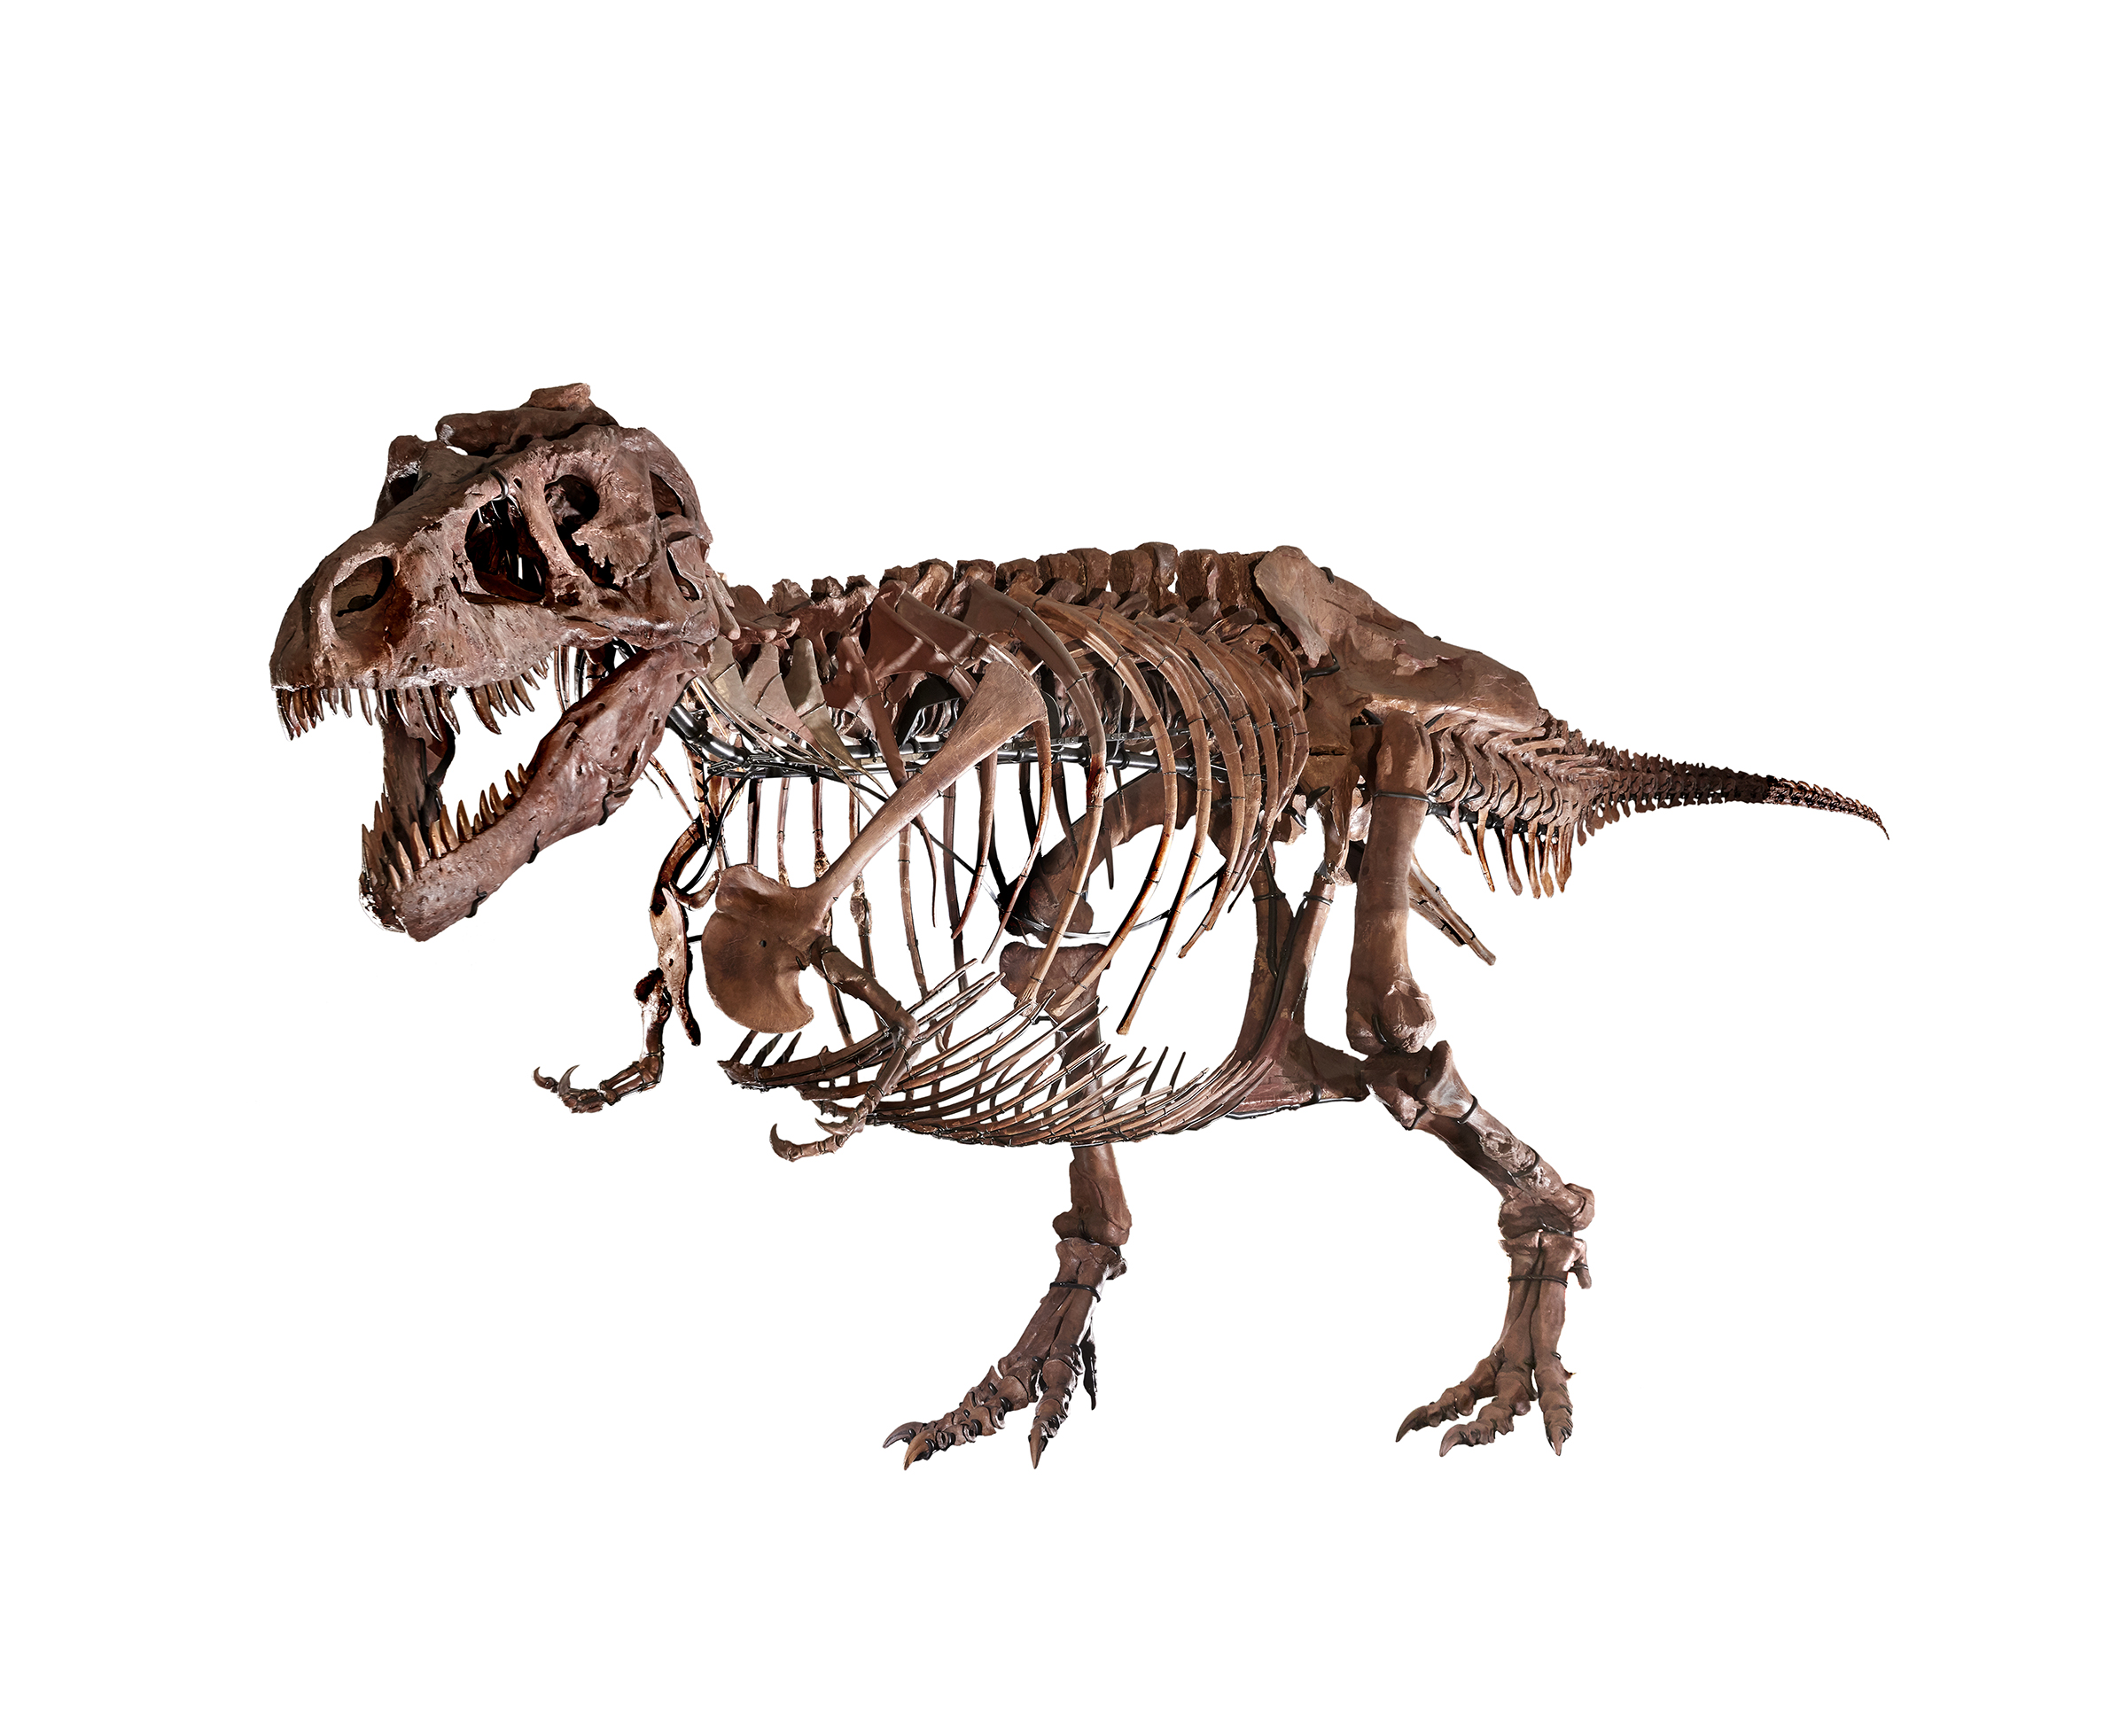 Skeleton of SUE the T. rex on a white background, showing SUE's gastralia (added to mount in 2018).